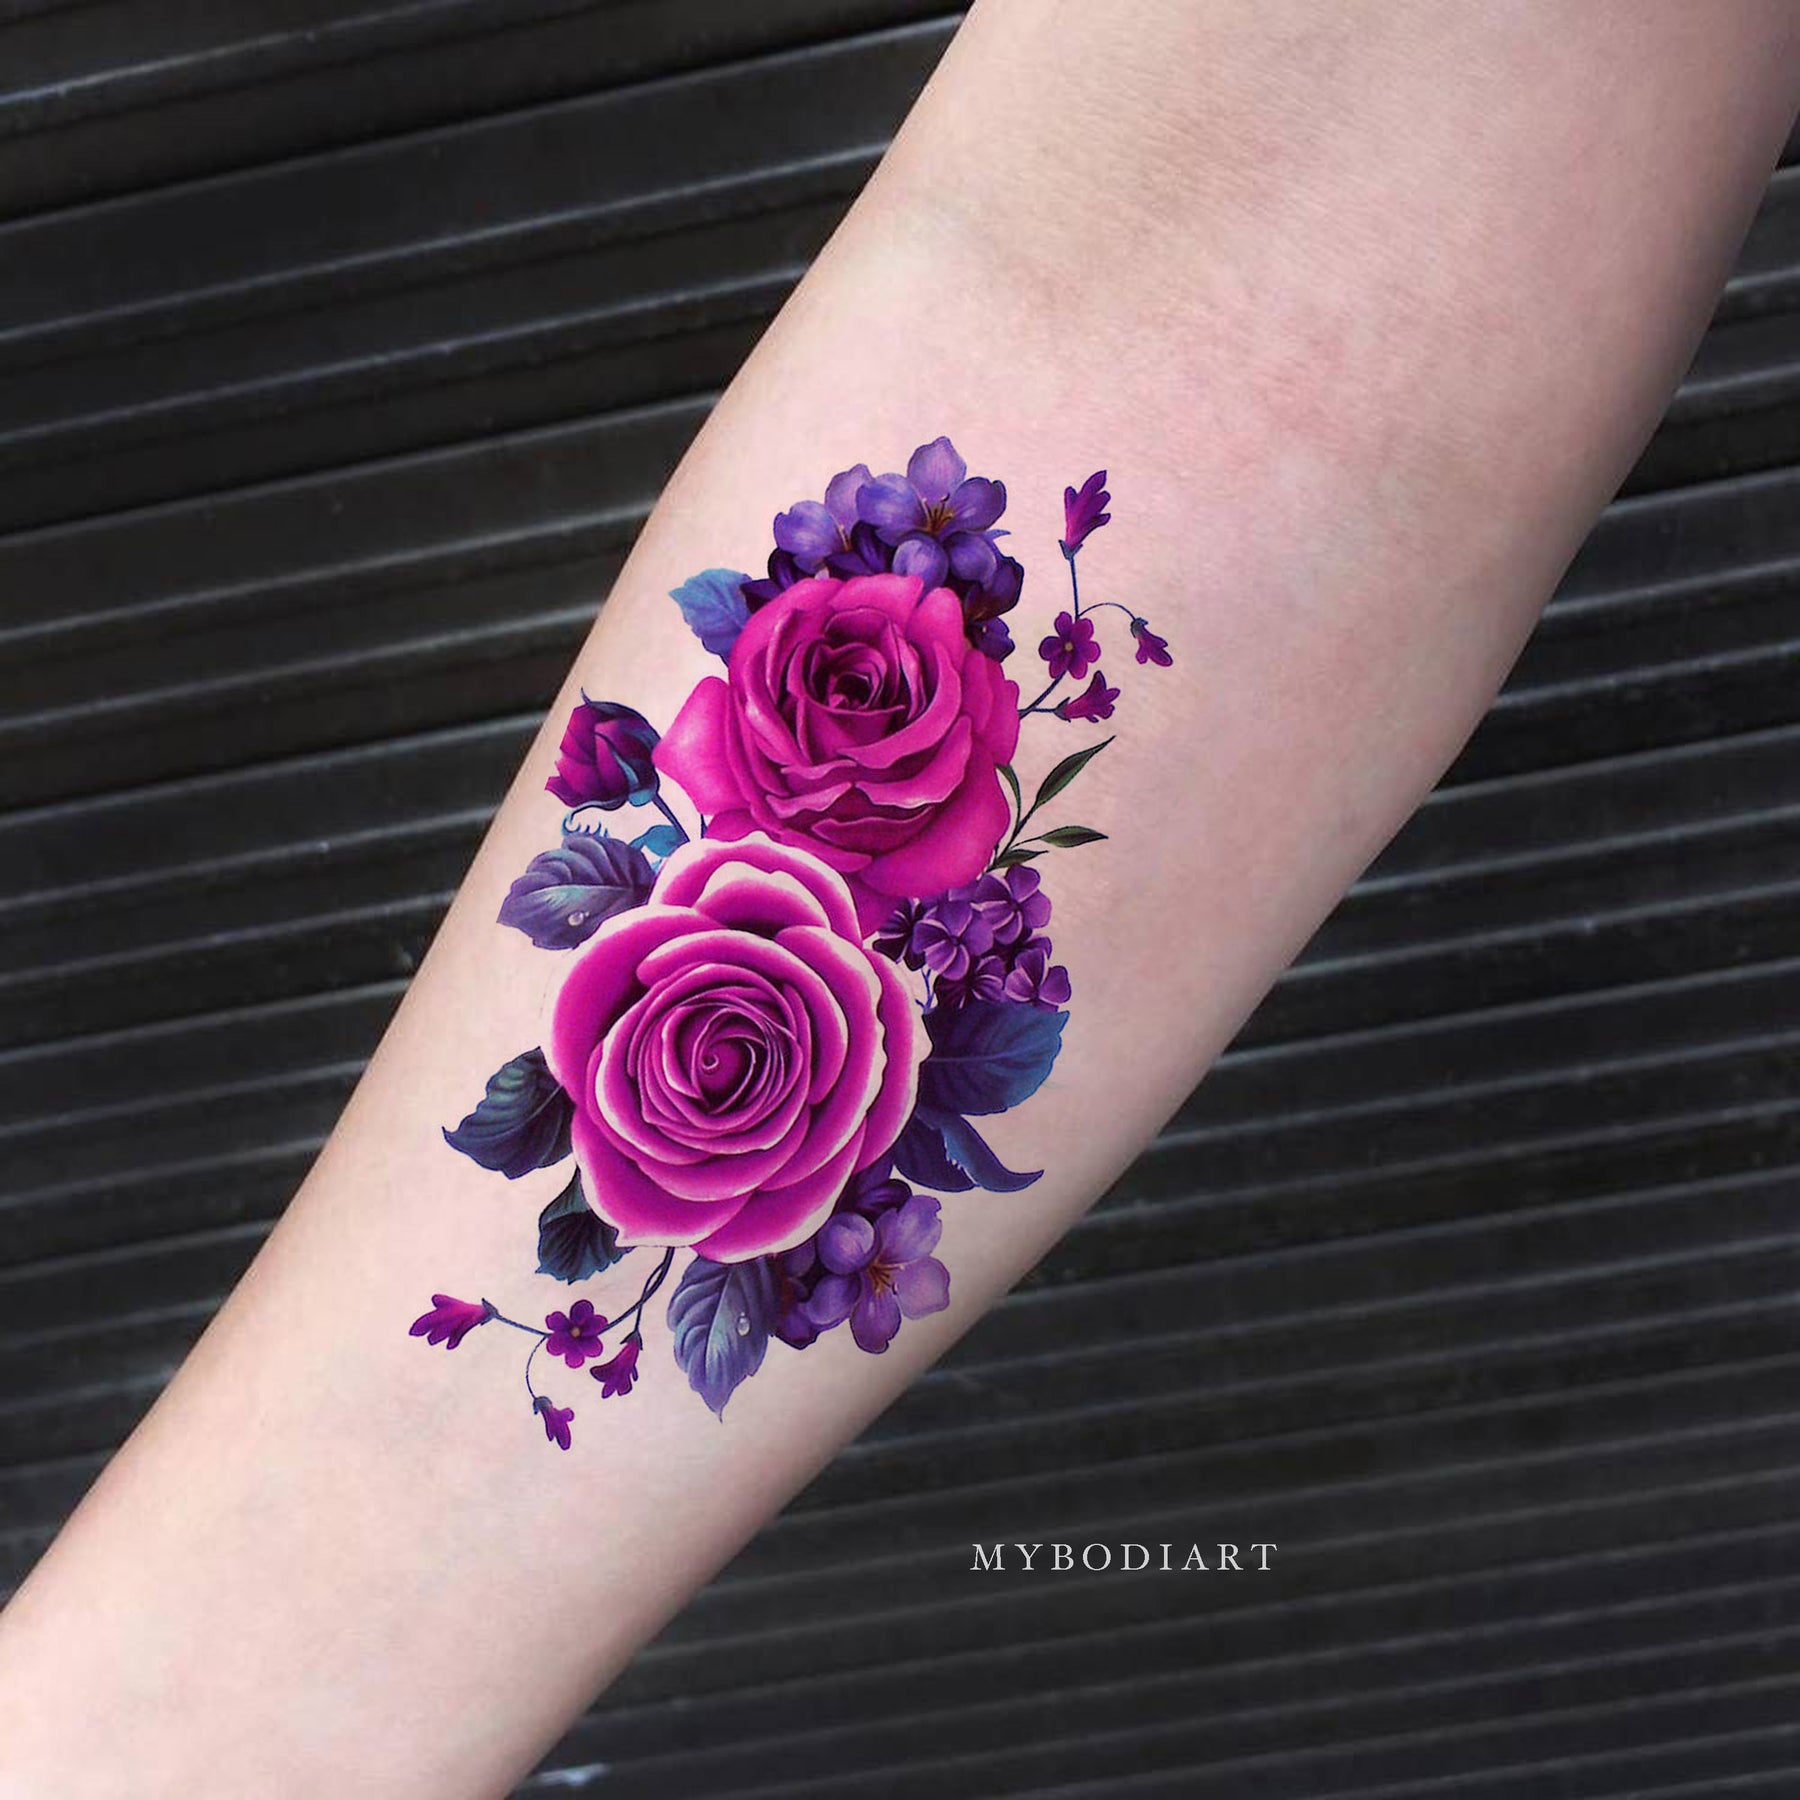 Little Minimal Flower Temporary Tattoo Stickers Yellow Red Small Lavender  Rose  Shop LAZY DUO TATTOO Temporary Tattoos  Pinkoi